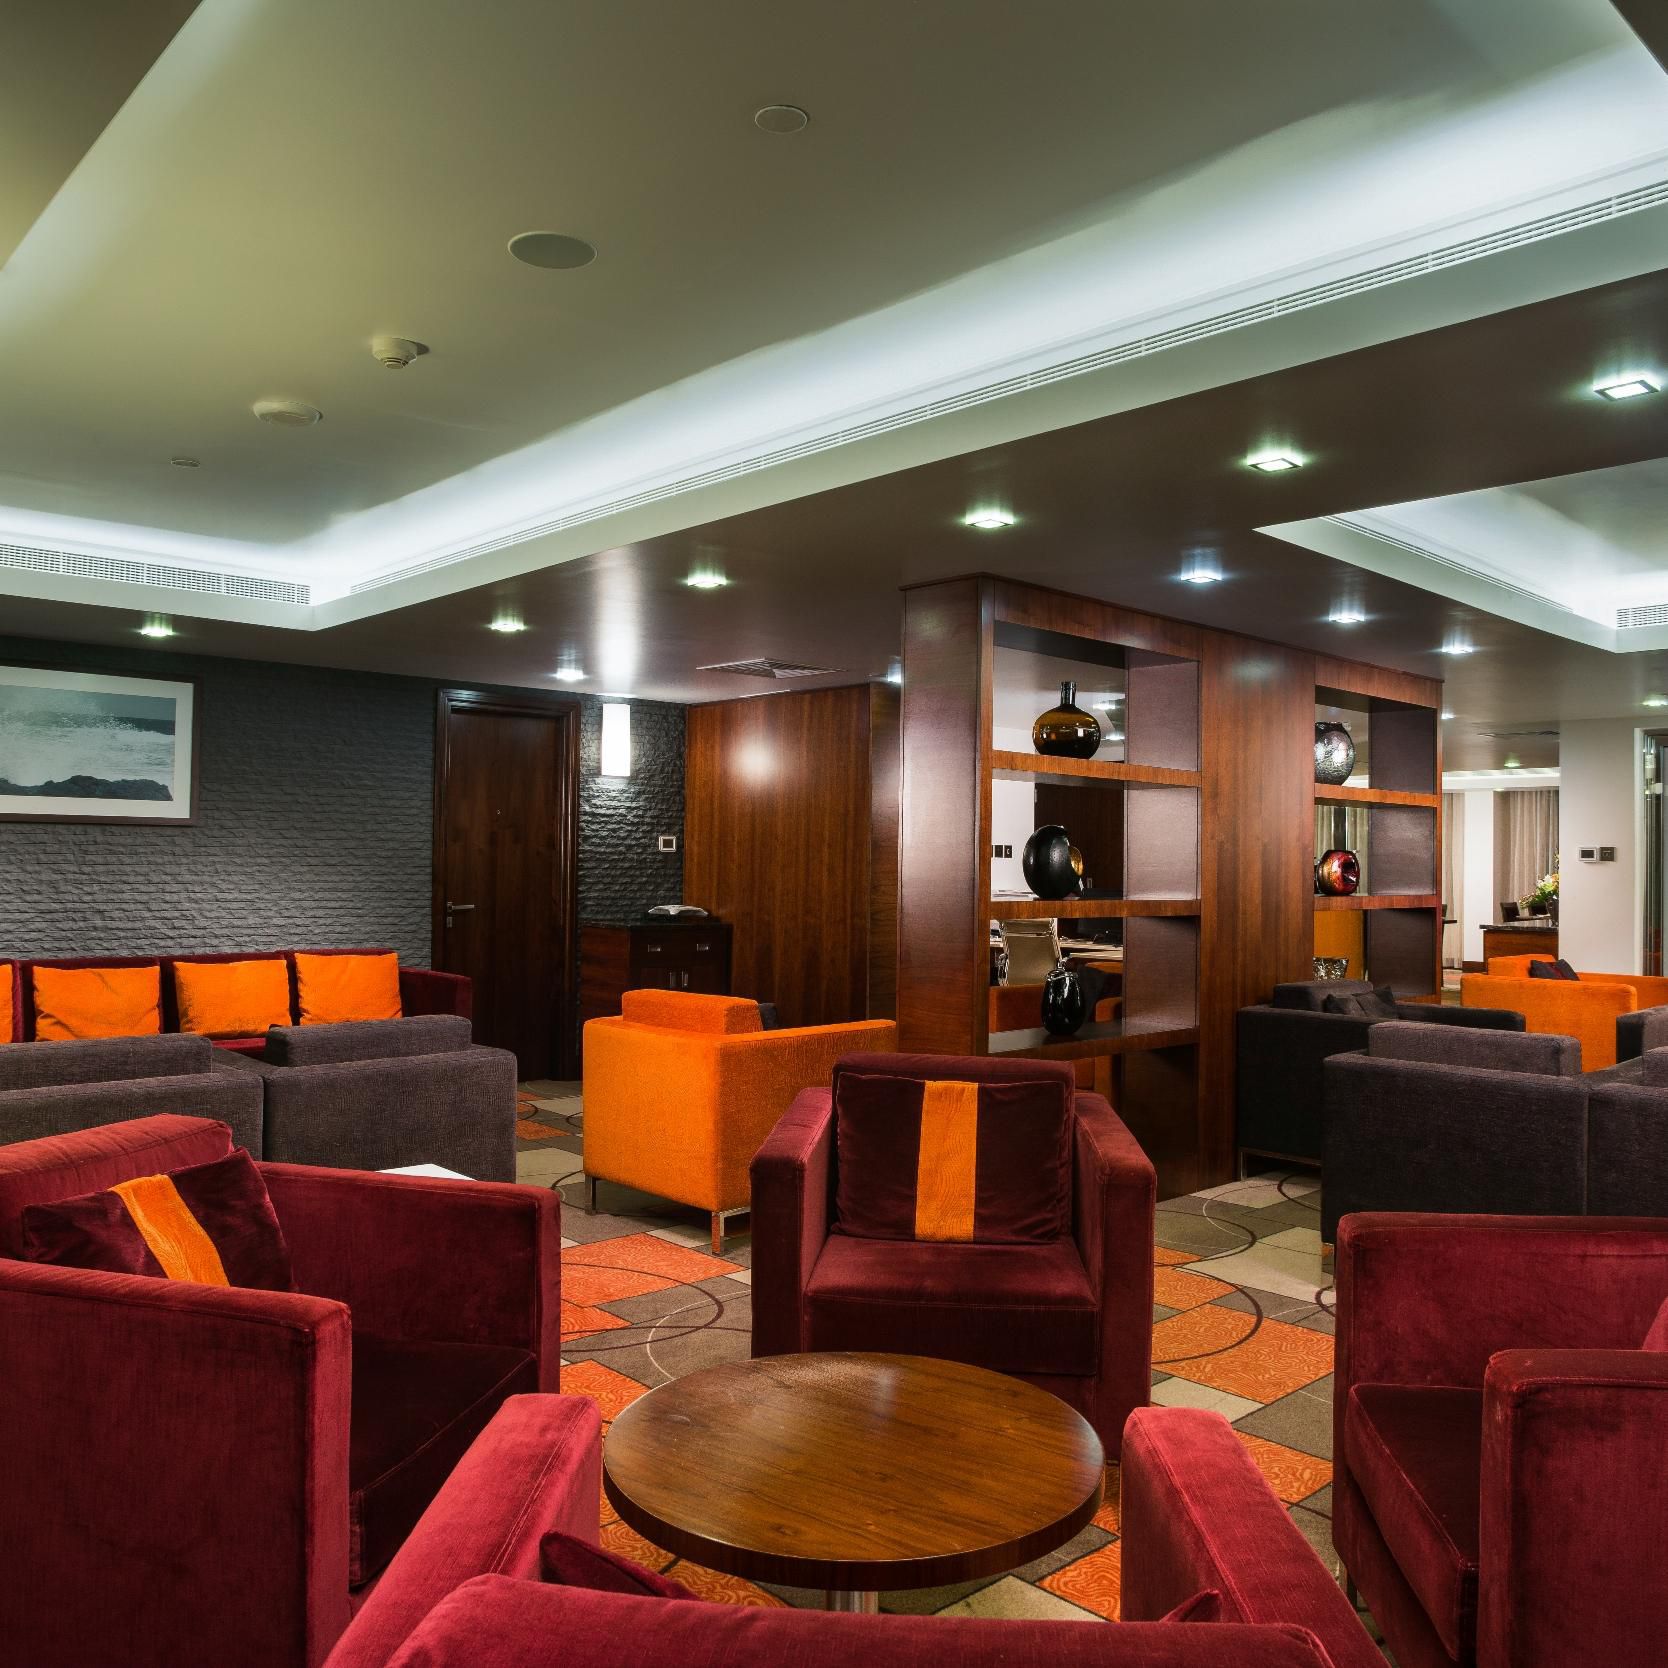 Club room guests gain exclusive access to the Club Lounge